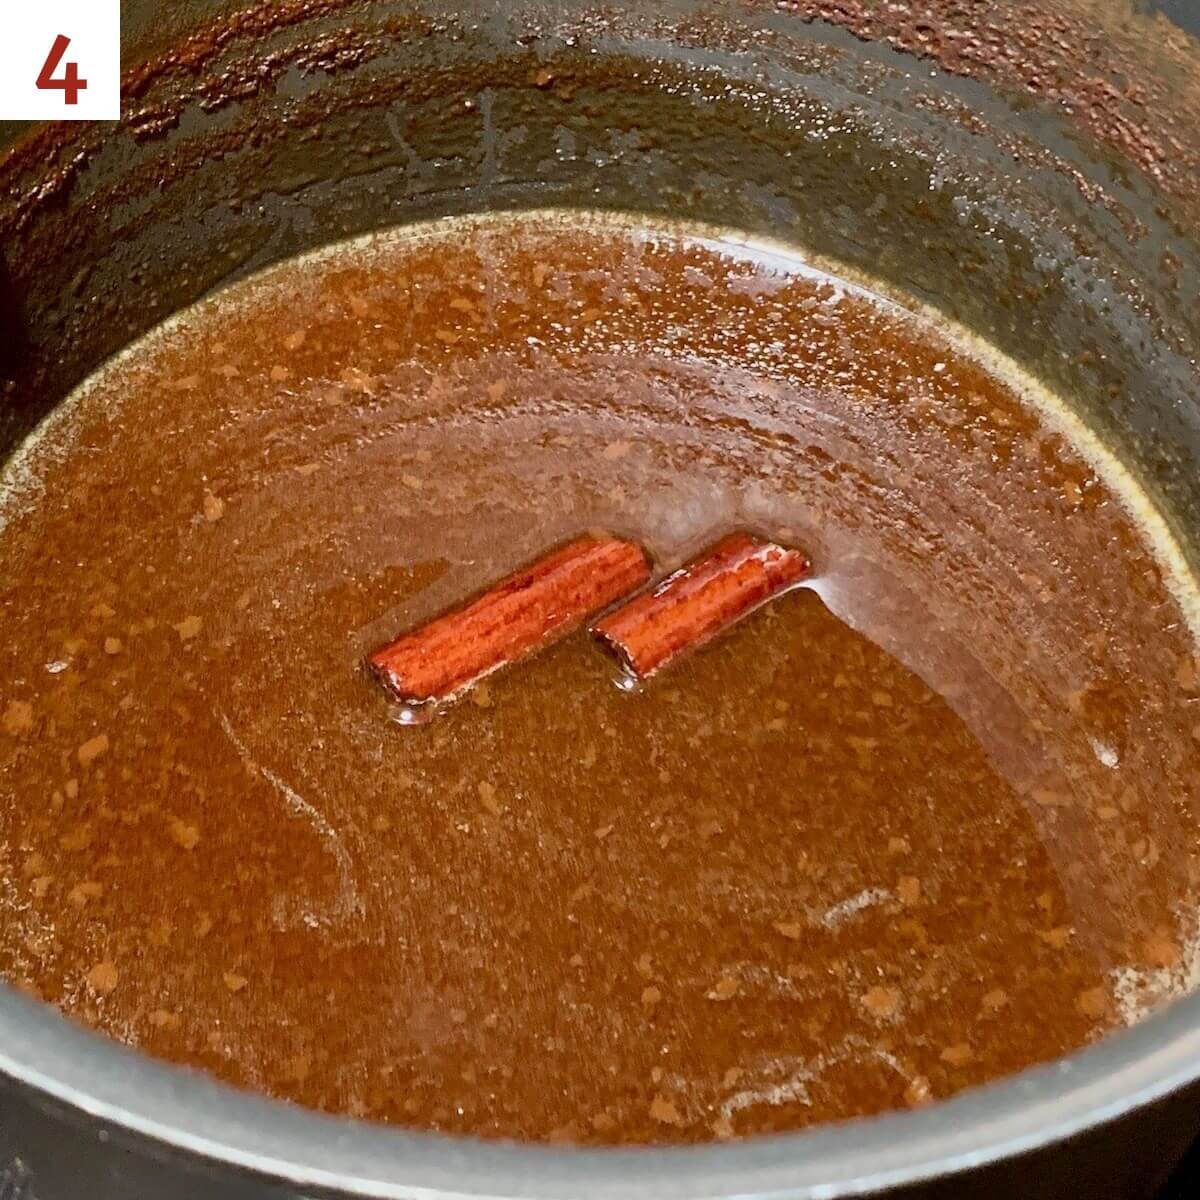 Finished boiled apple cider in the pot with cinnamon sticks